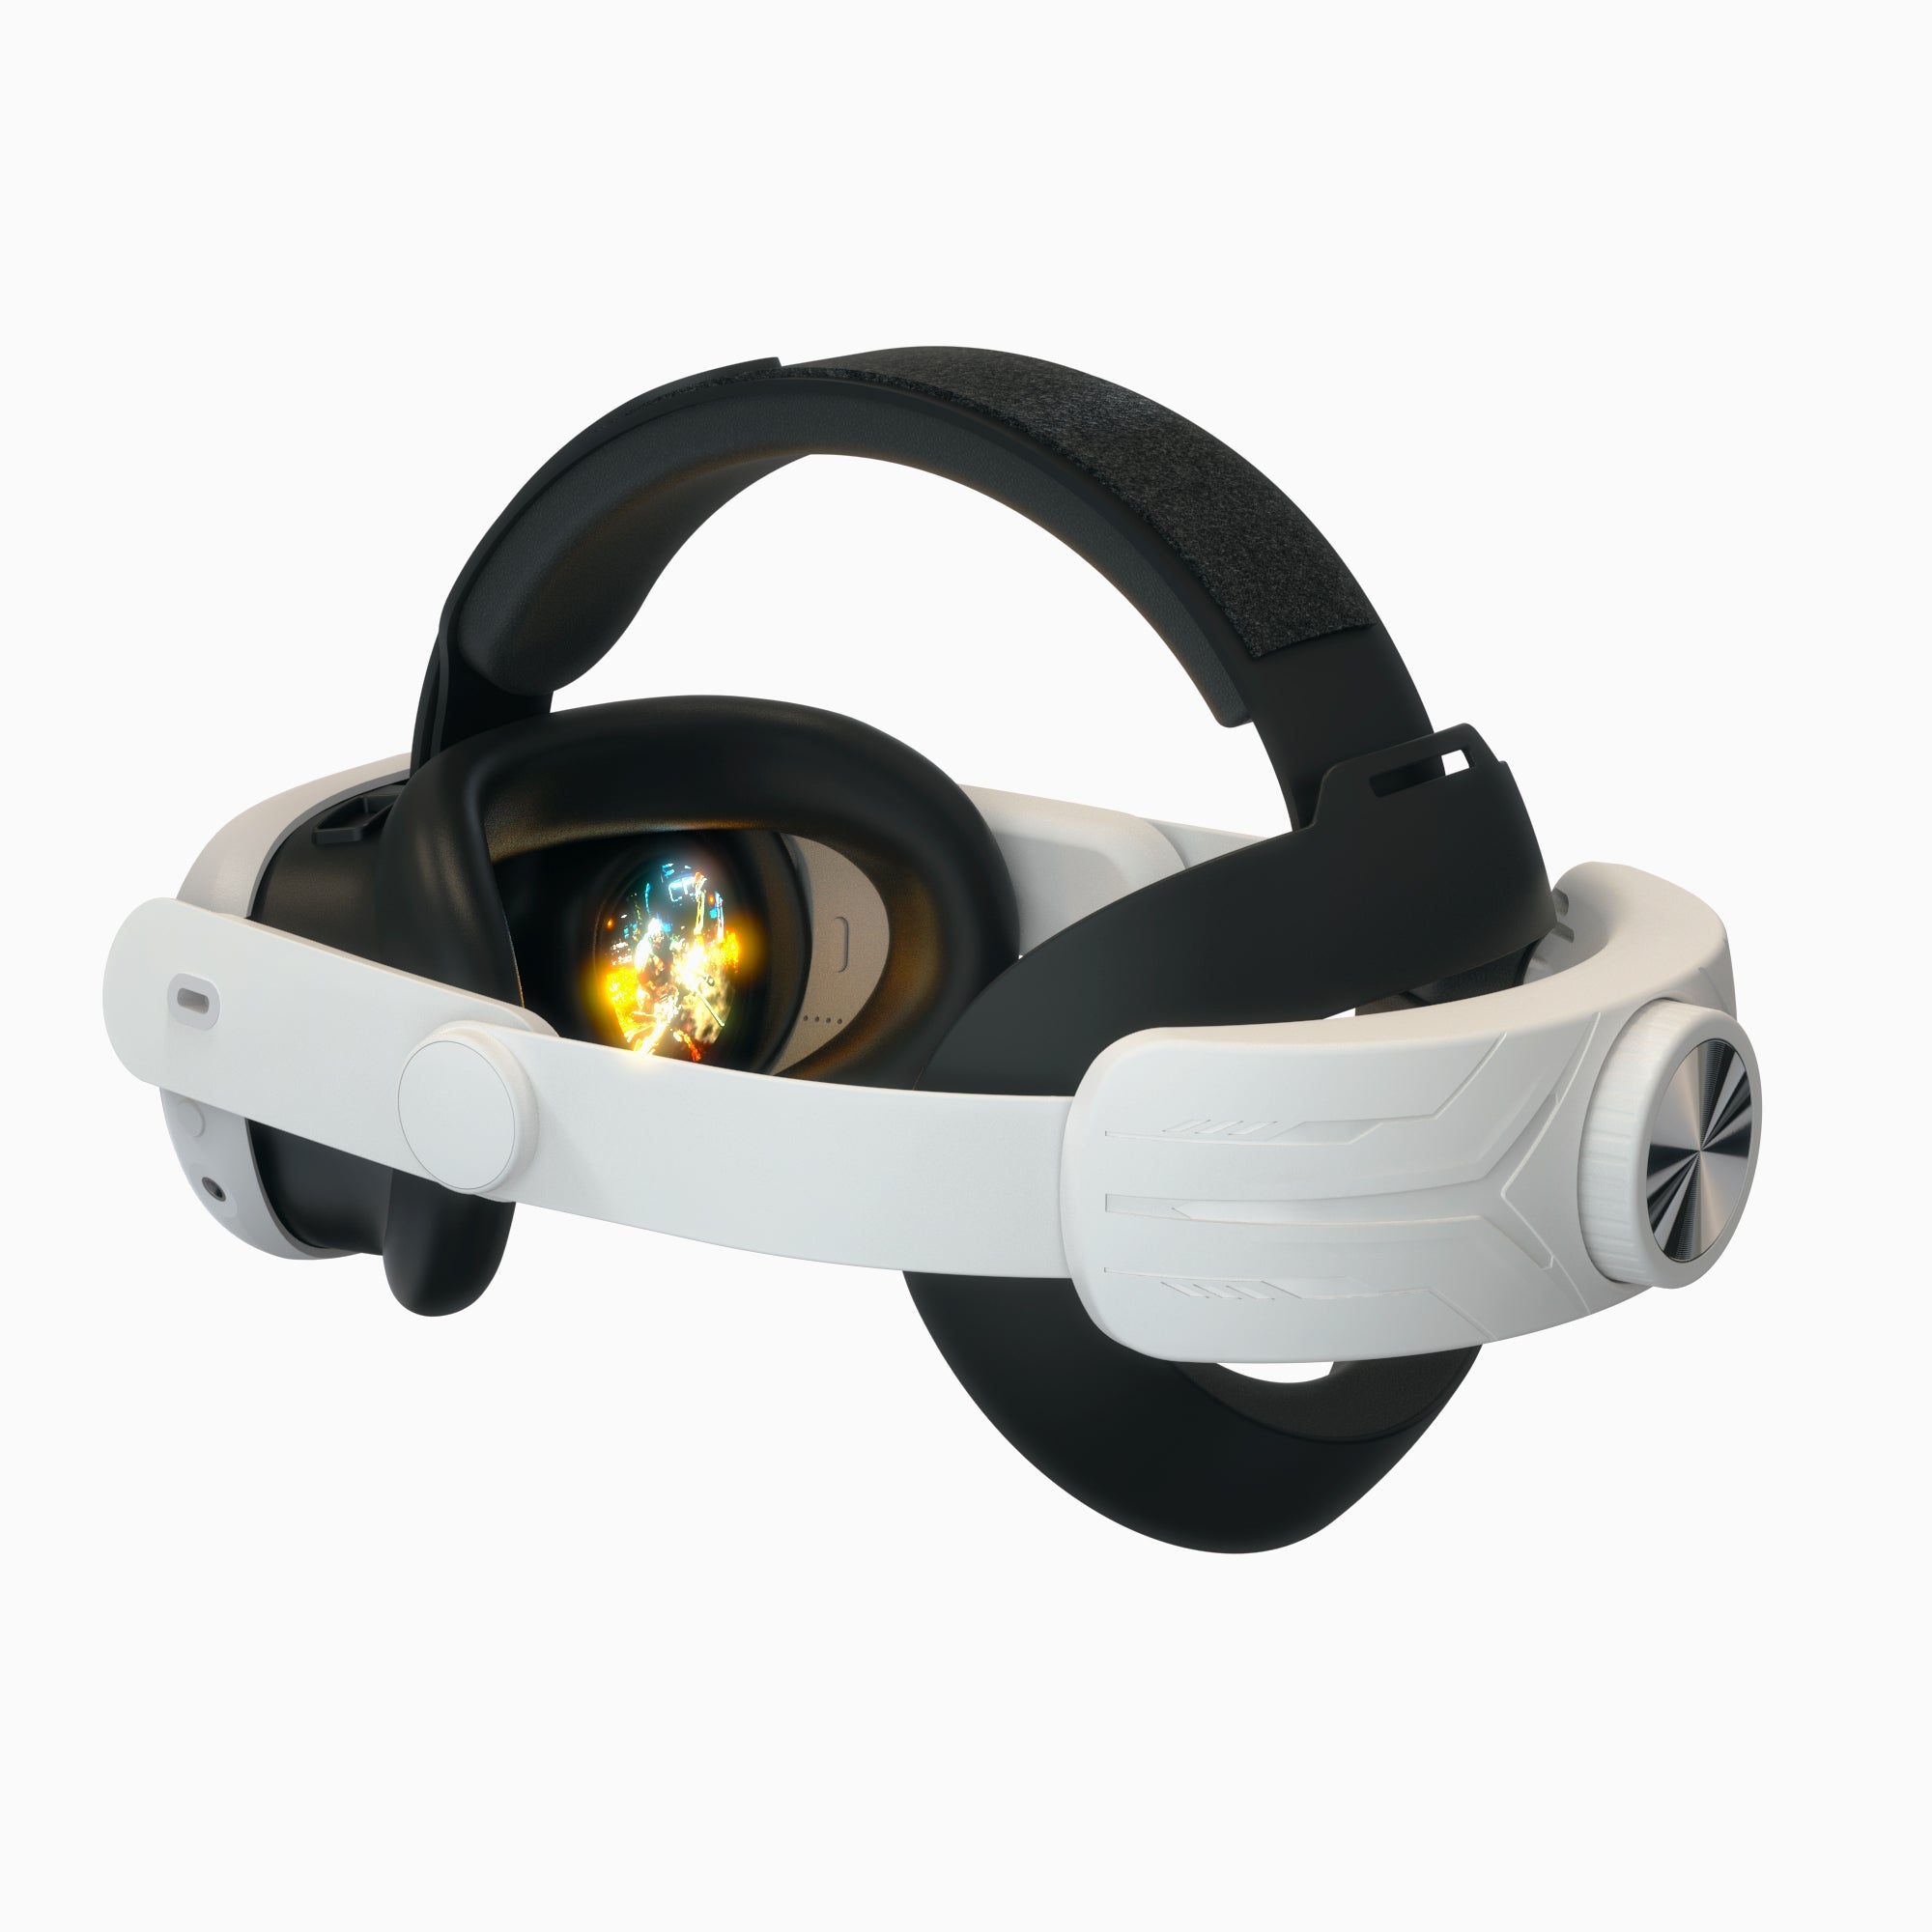 Gamax Meta Quest 3 Head Strap Elite Style - White - Level UpGamaxVirtual Reality Accessories6972520255205